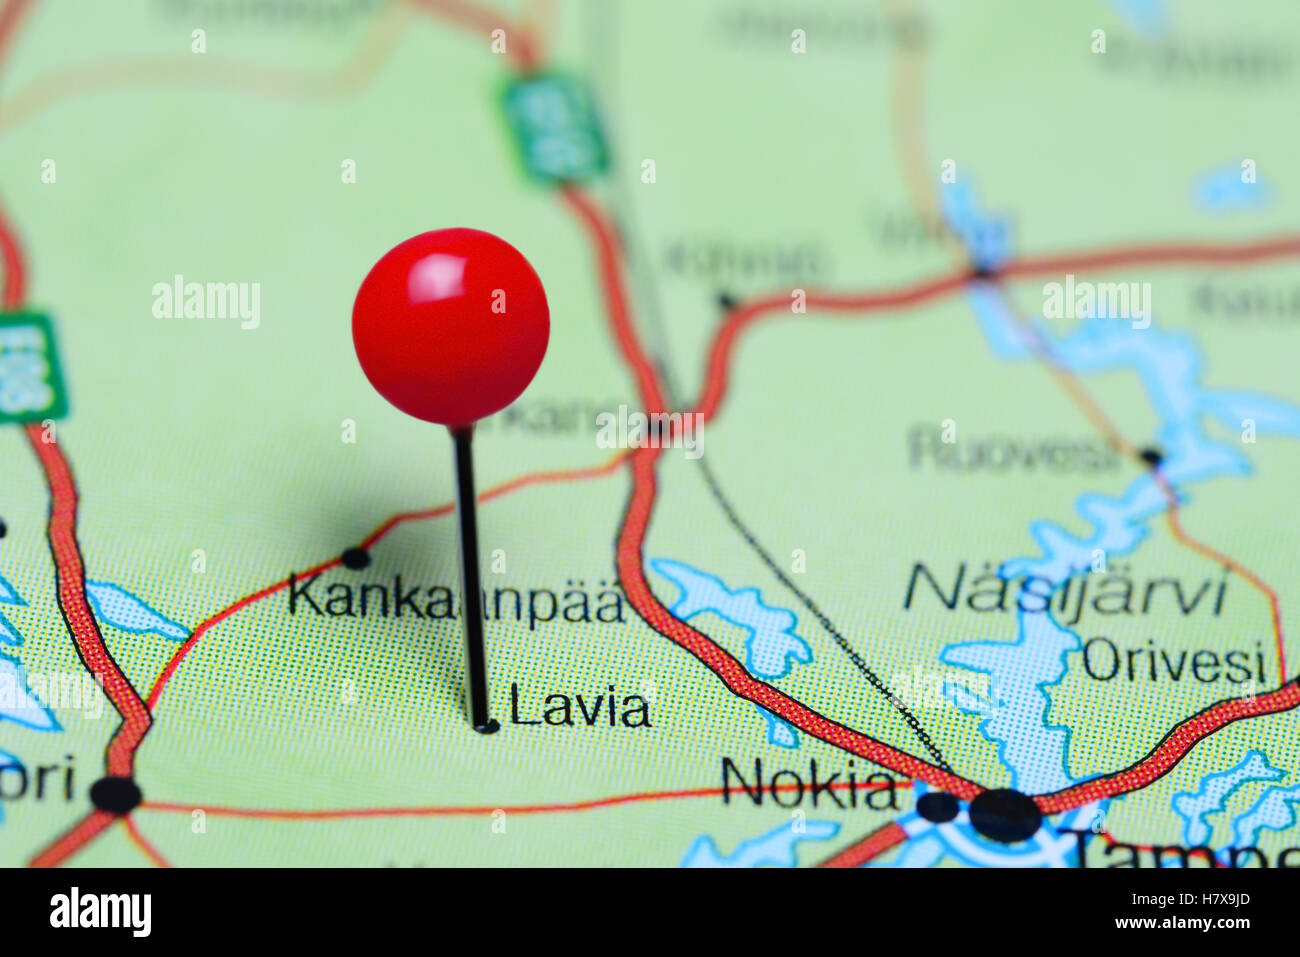 Lavia pinned on a map of Finland Stock Photo